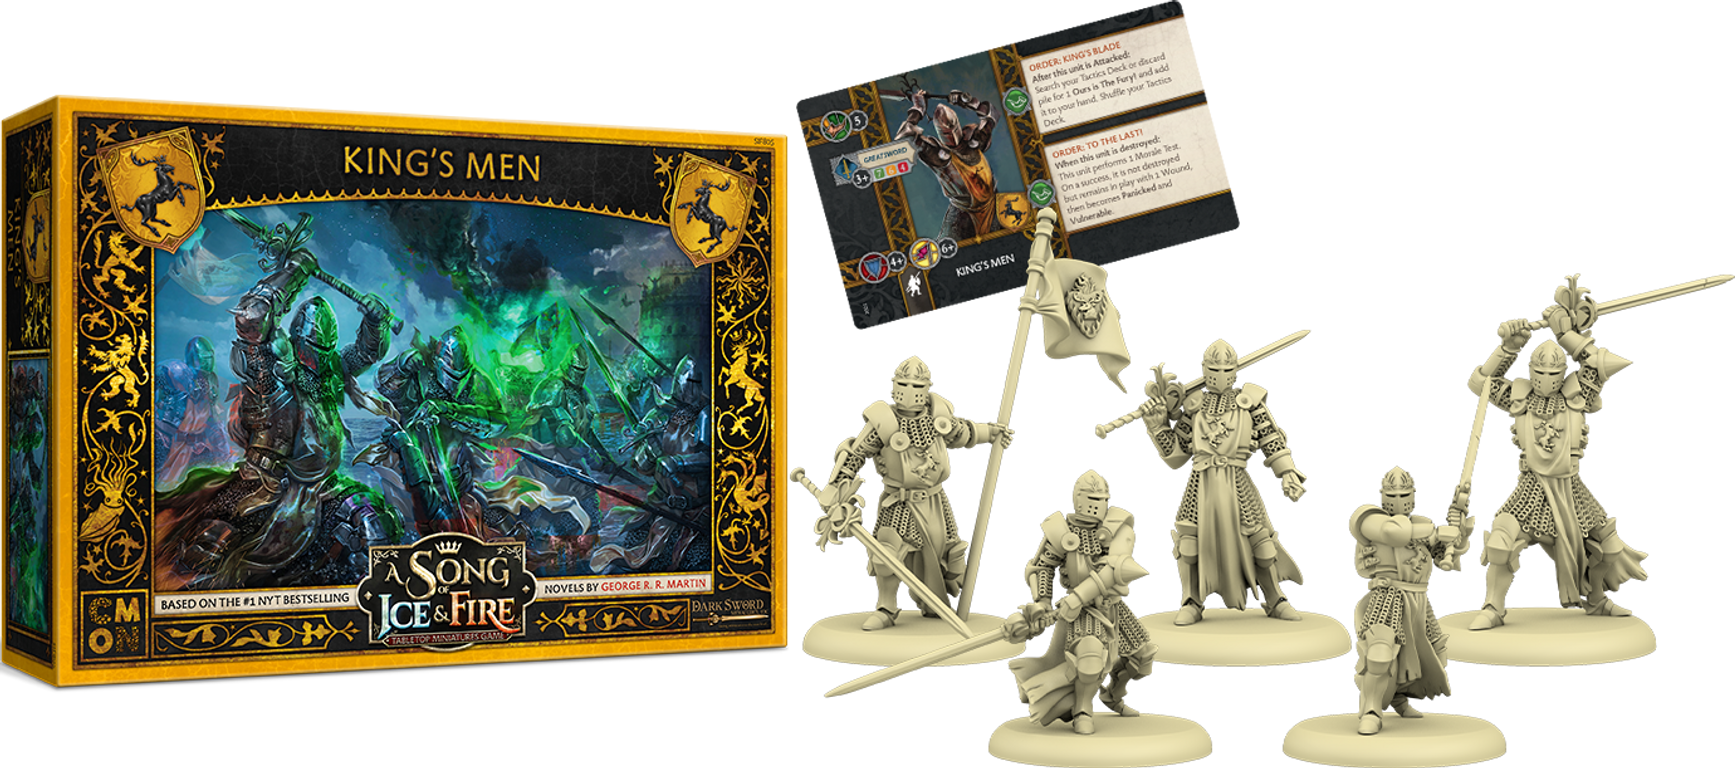 A Song of Ice & Fire: Tabletop Miniatures Game – King's Men komponenten